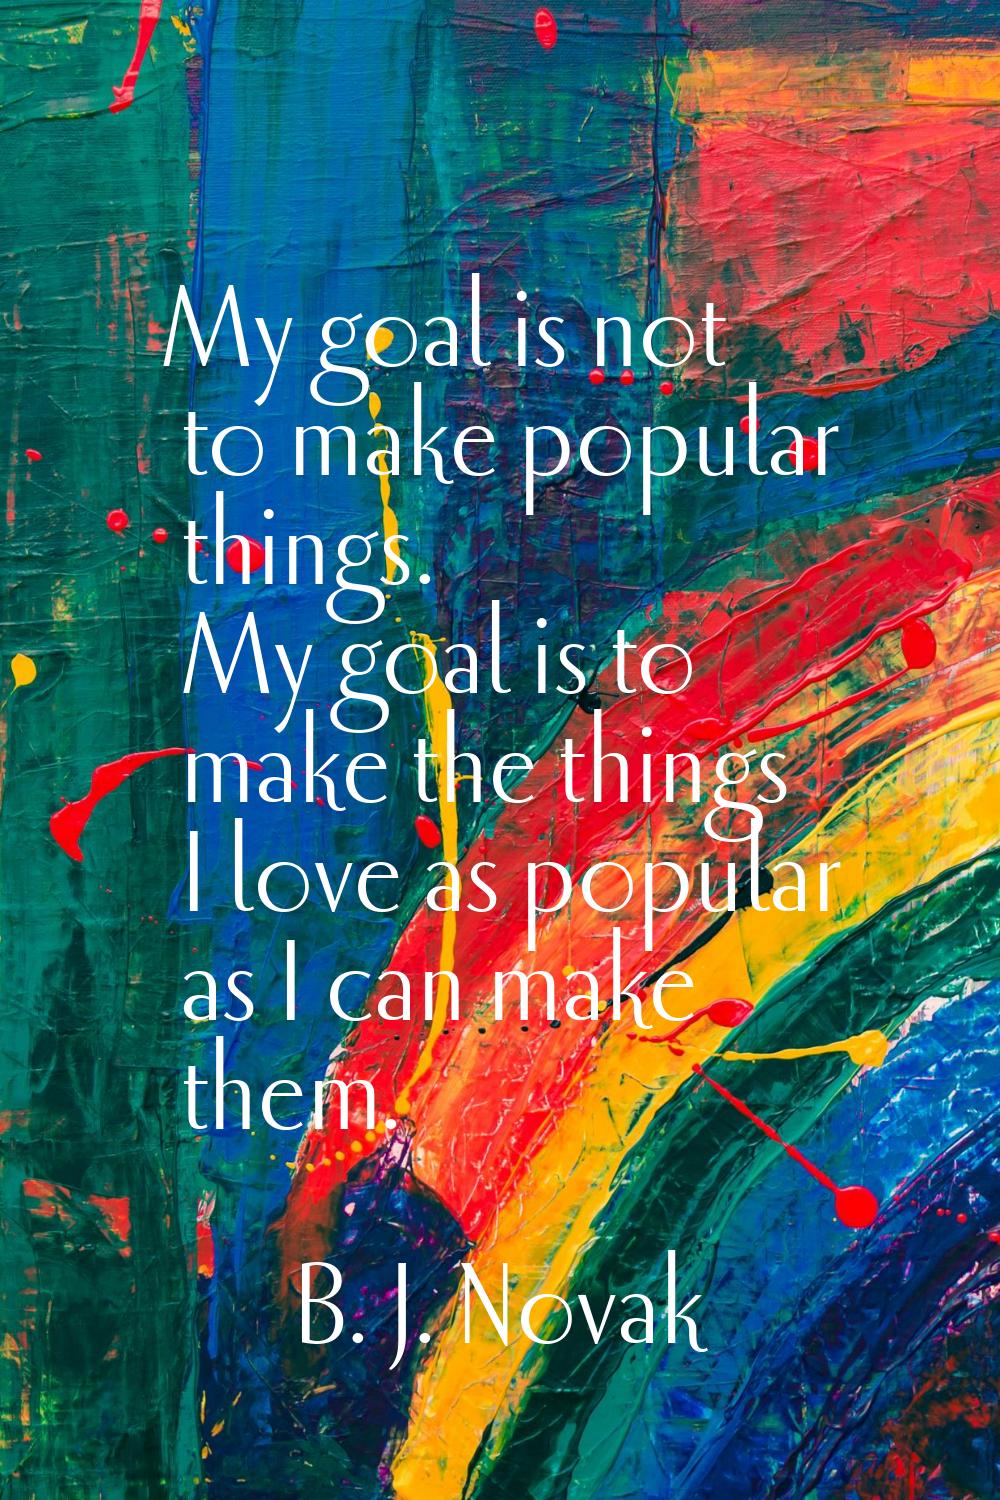 My goal is not to make popular things. My goal is to make the things I love as popular as I can mak